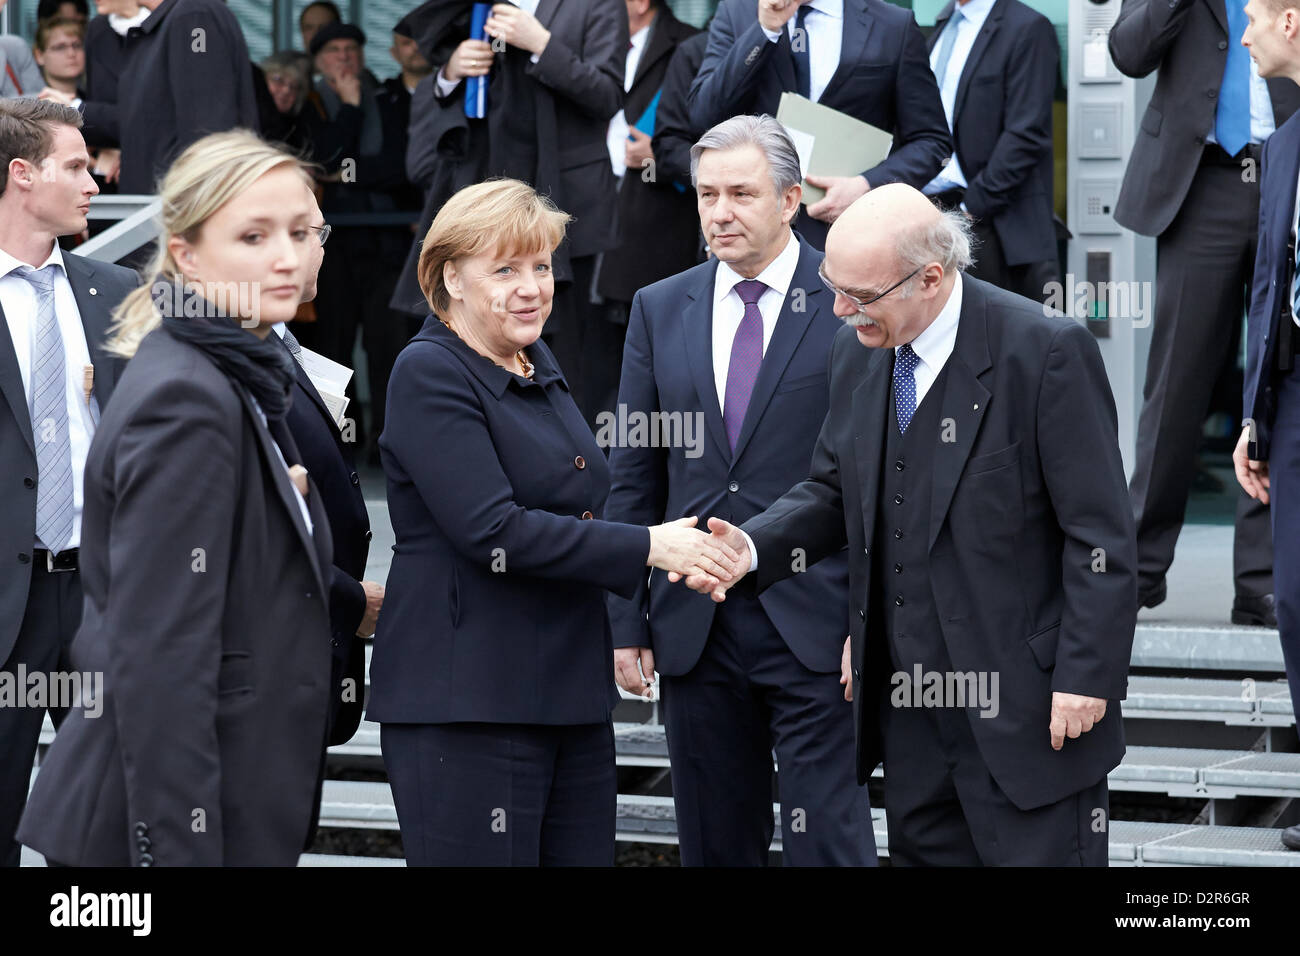 Berlin, Germany. 30th January 2013. German Chancellor Angela Merkel holds a speech at the opening of the exhibition 'Berlin 1933 - The road to dictatorship' at the documentation center Topography of Terror in Berlin.  Foto: (left to right) German Chancellor Angela Merkel, Berlin's mayor Klaus Wowereit (back right), and the director of the Topography of Terror Foundation, Andreas Nachama. Credit:  Reynaldo Chaib Paganelli / Alamy Live News Stock Photo